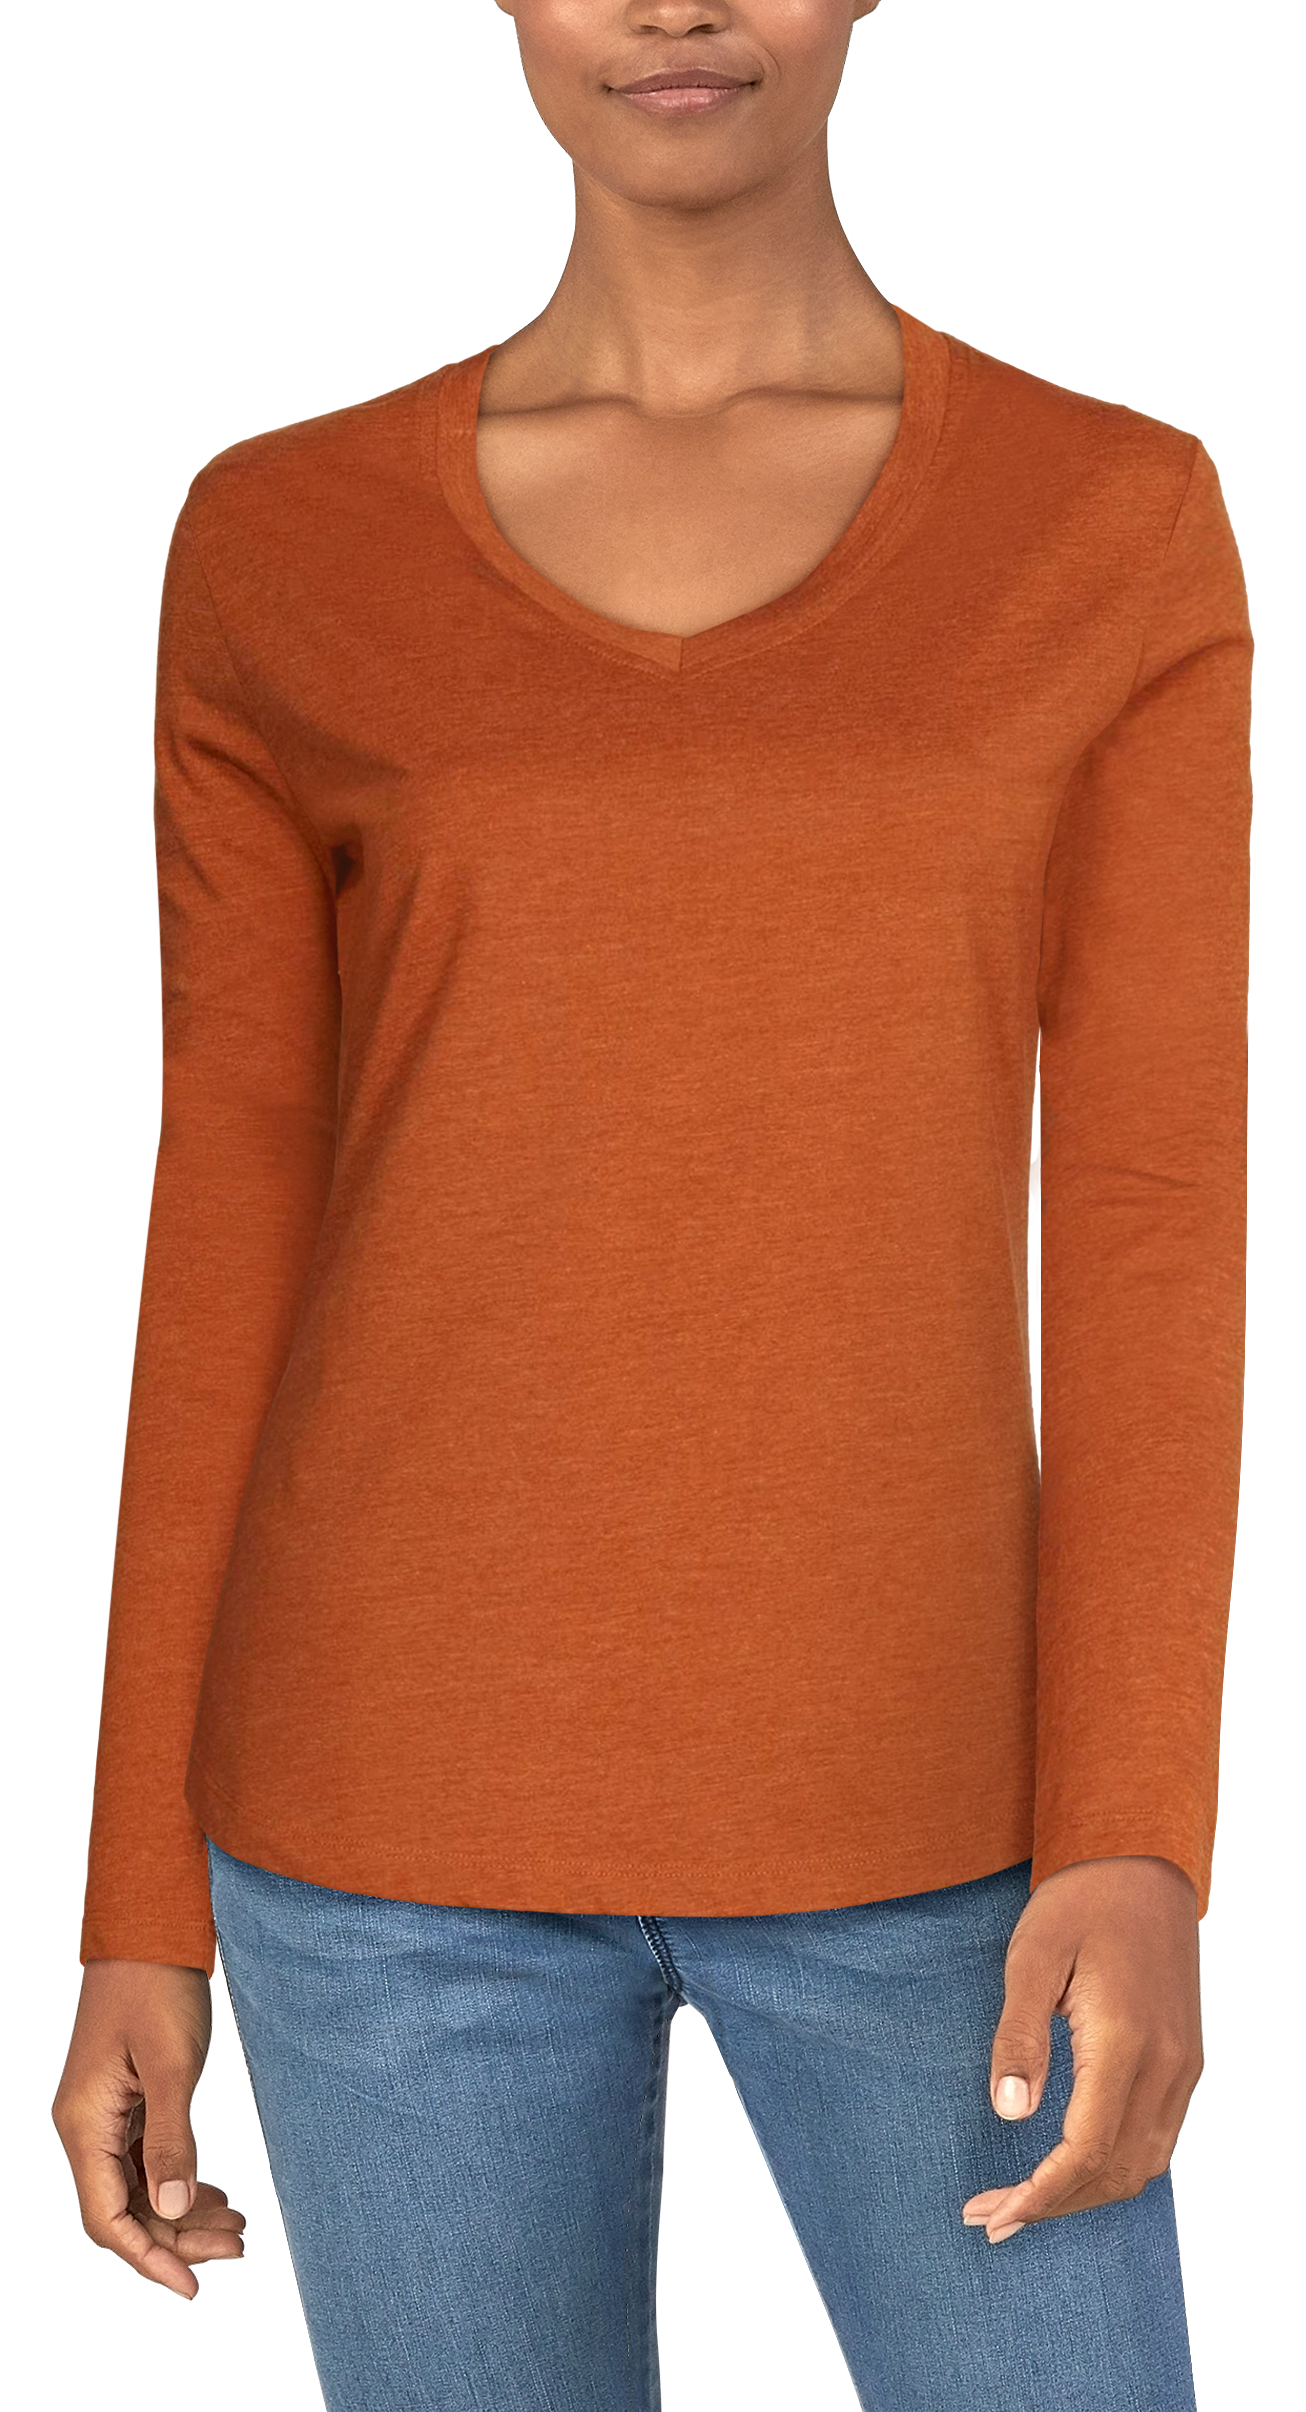 Natural Reflections Essential Long-Sleeve V-Neck T-Shirt for Ladies - Caramel Cafe - 2X